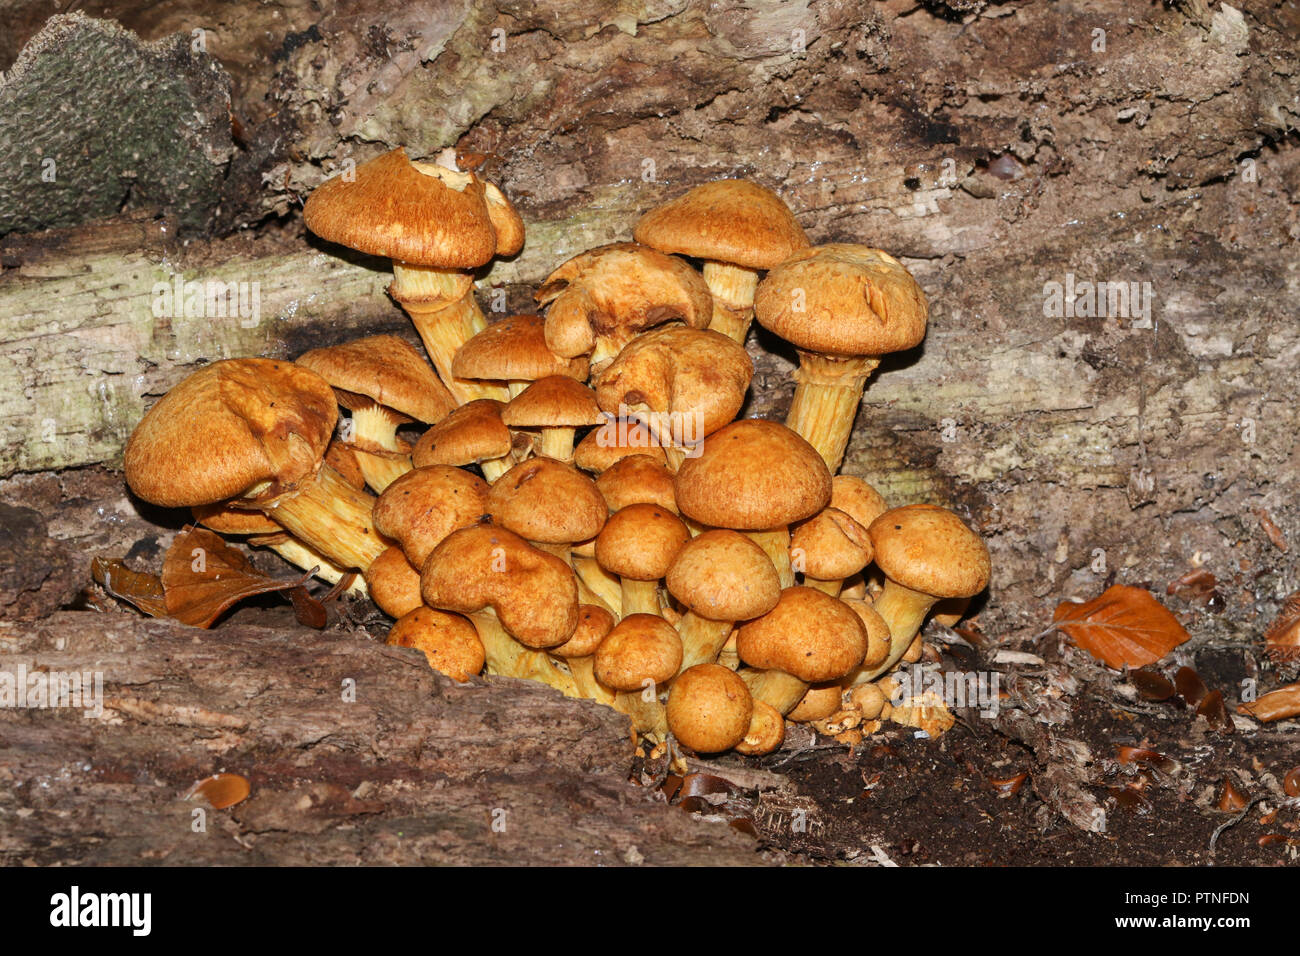 A group of Golden Scalycap fungus (Pholiota aurivella) growing out of a dead Beech tree in a forest. Stock Photo